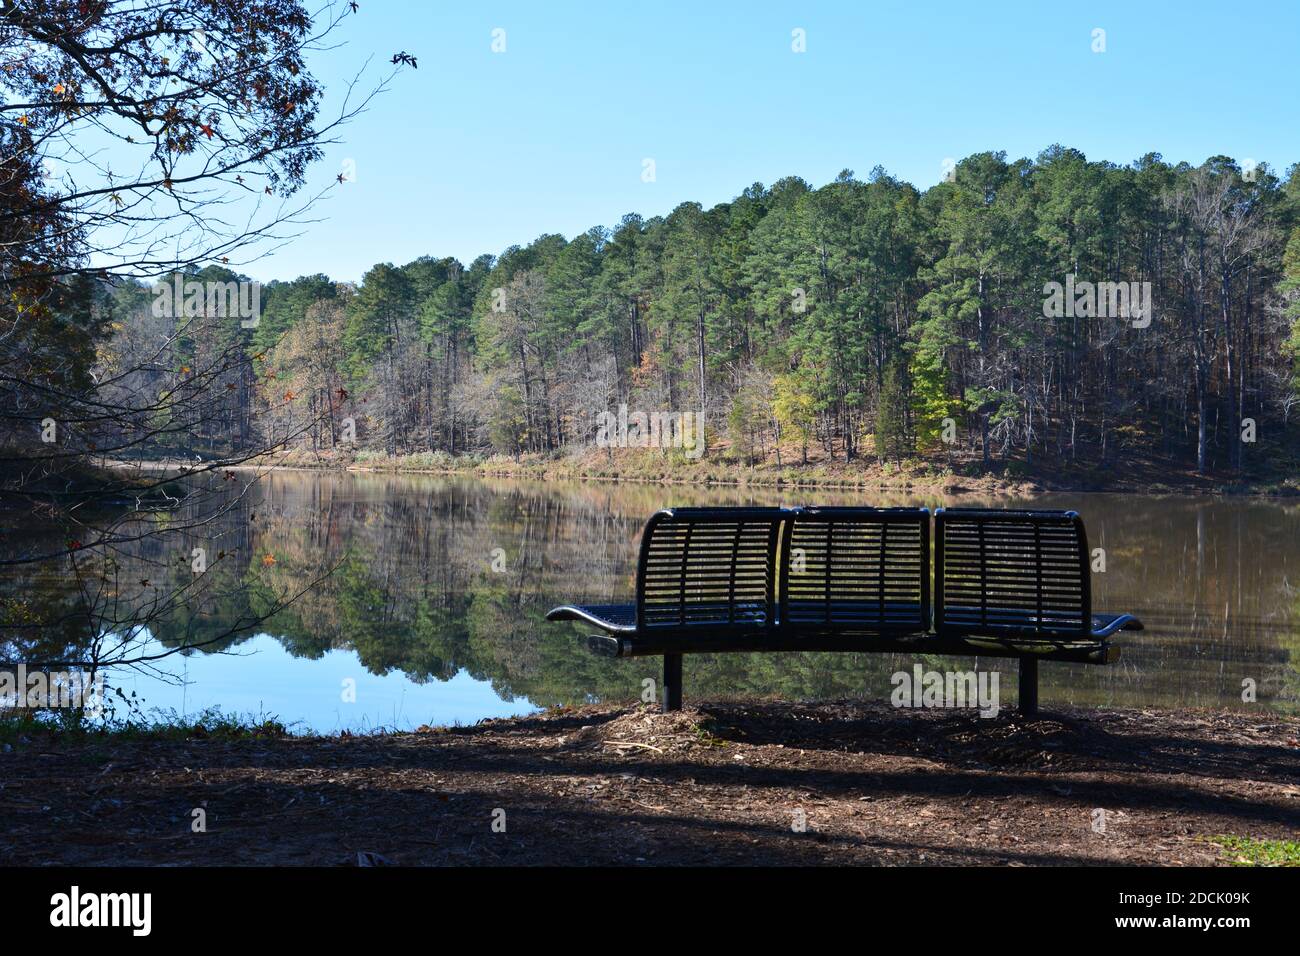 Reedy Creek Lake nell'Umstead state Park di Raleigh, North Carolina. Foto Stock